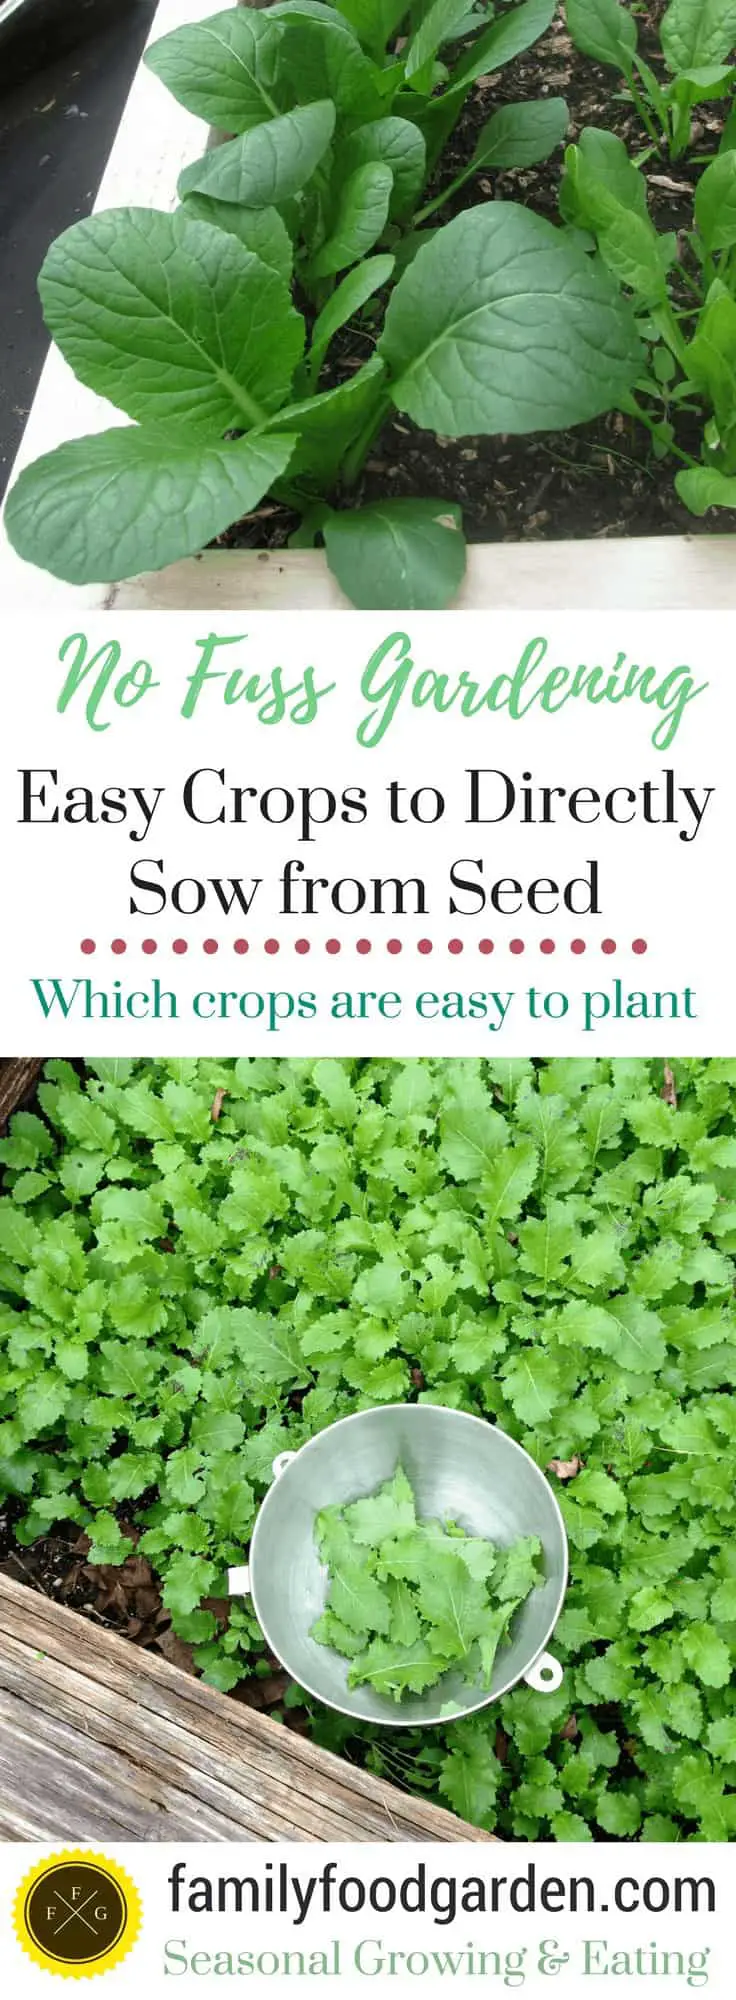 The easiest vegetables to grow